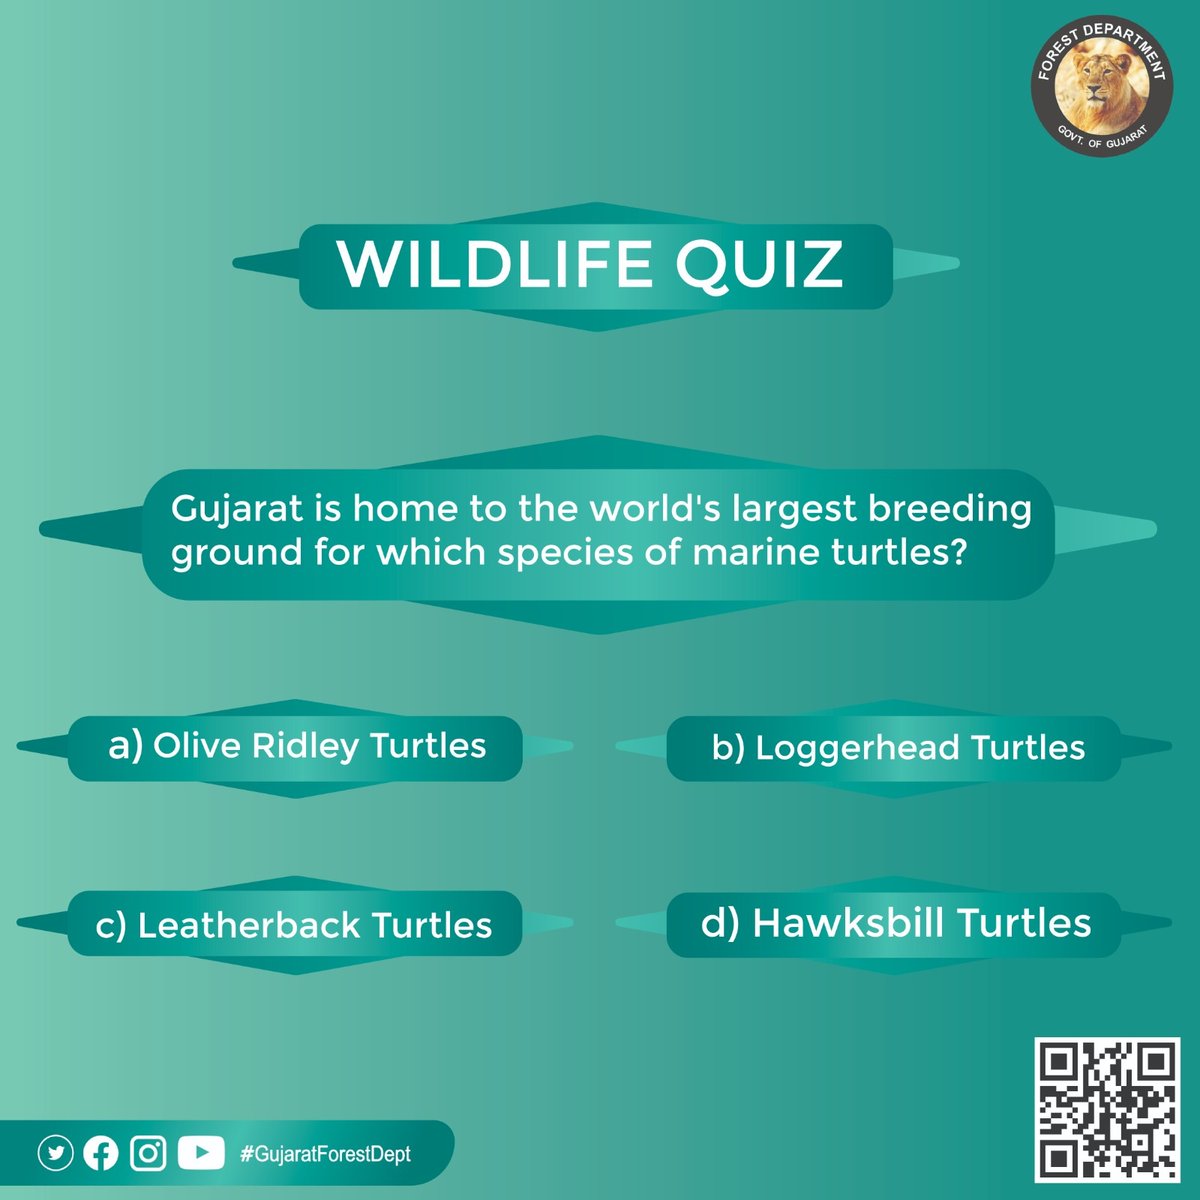 Wildlife Quiz Time: Test Your Knowledge and Learn Something New!
#wildlifequiz #Gujforestdept